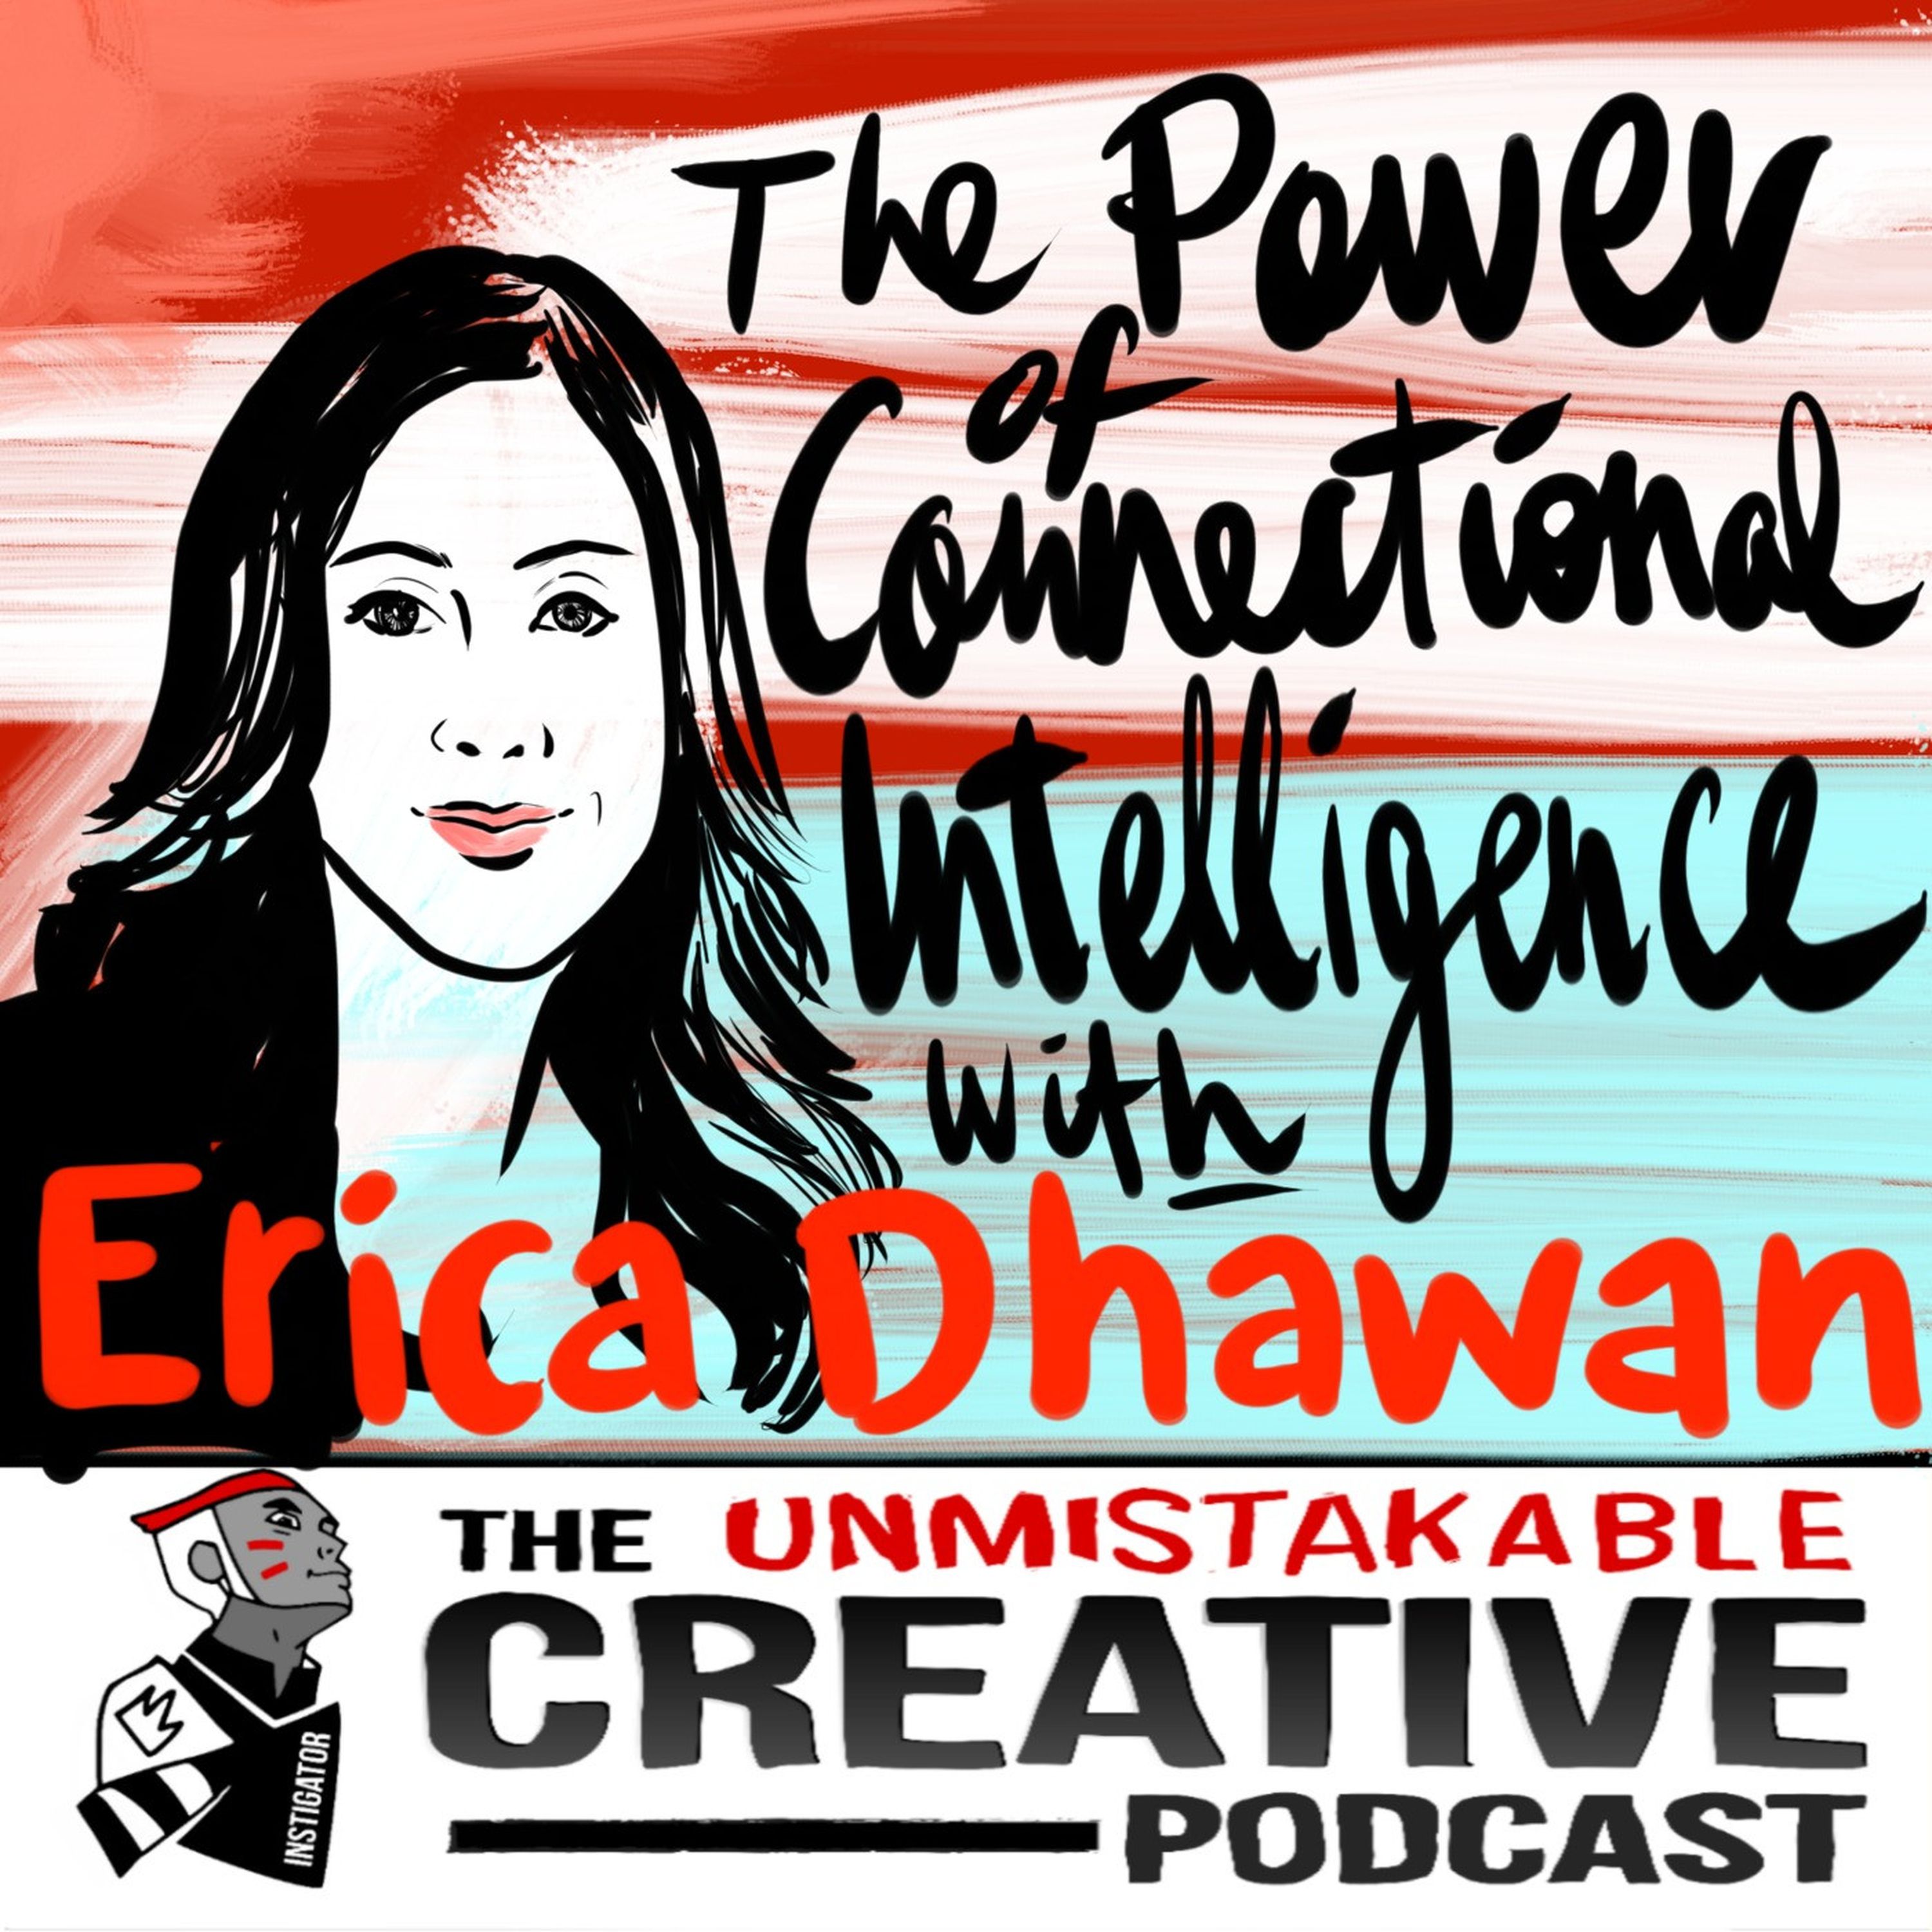 The Power of Connectional Intelligence with Erica Dhawan